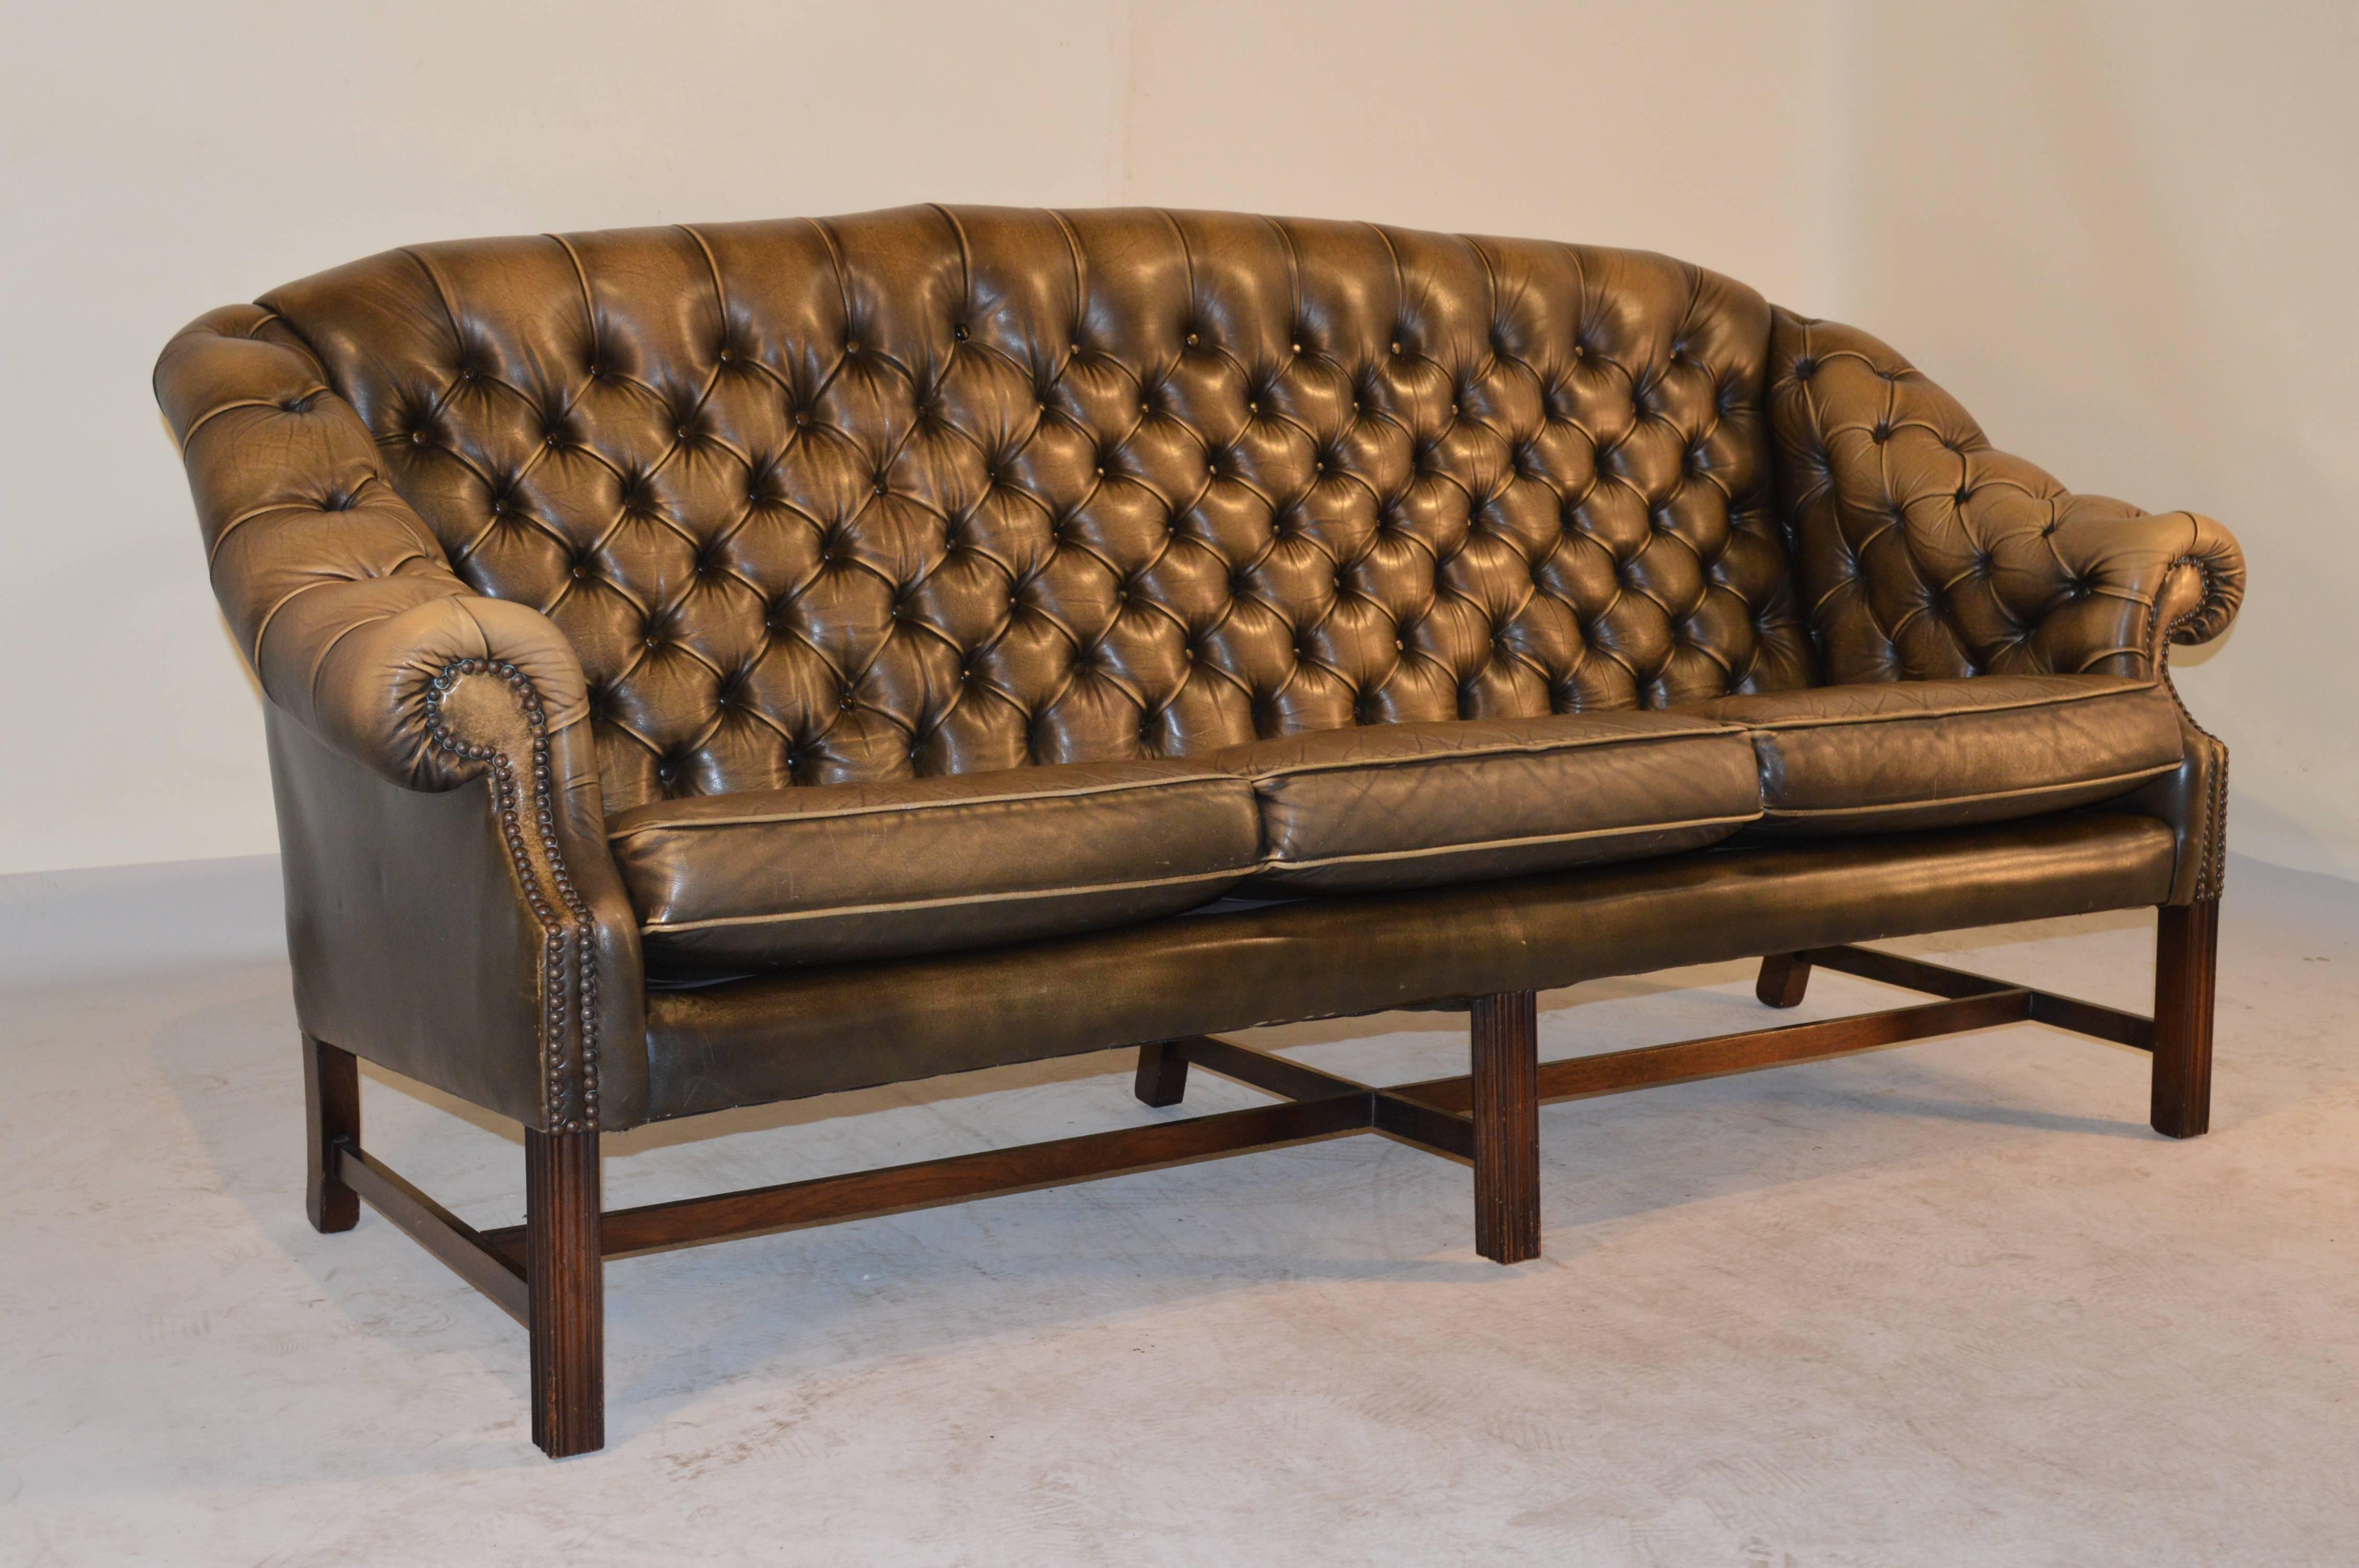 Mid-Century English leather chesterfield sofa with a mahogany frame and lovely old patinated leather upholstery.  It has sloping rolled arms and is wonderfully tufted.  The upholstery is in good condition with age wear.  The seat height measures